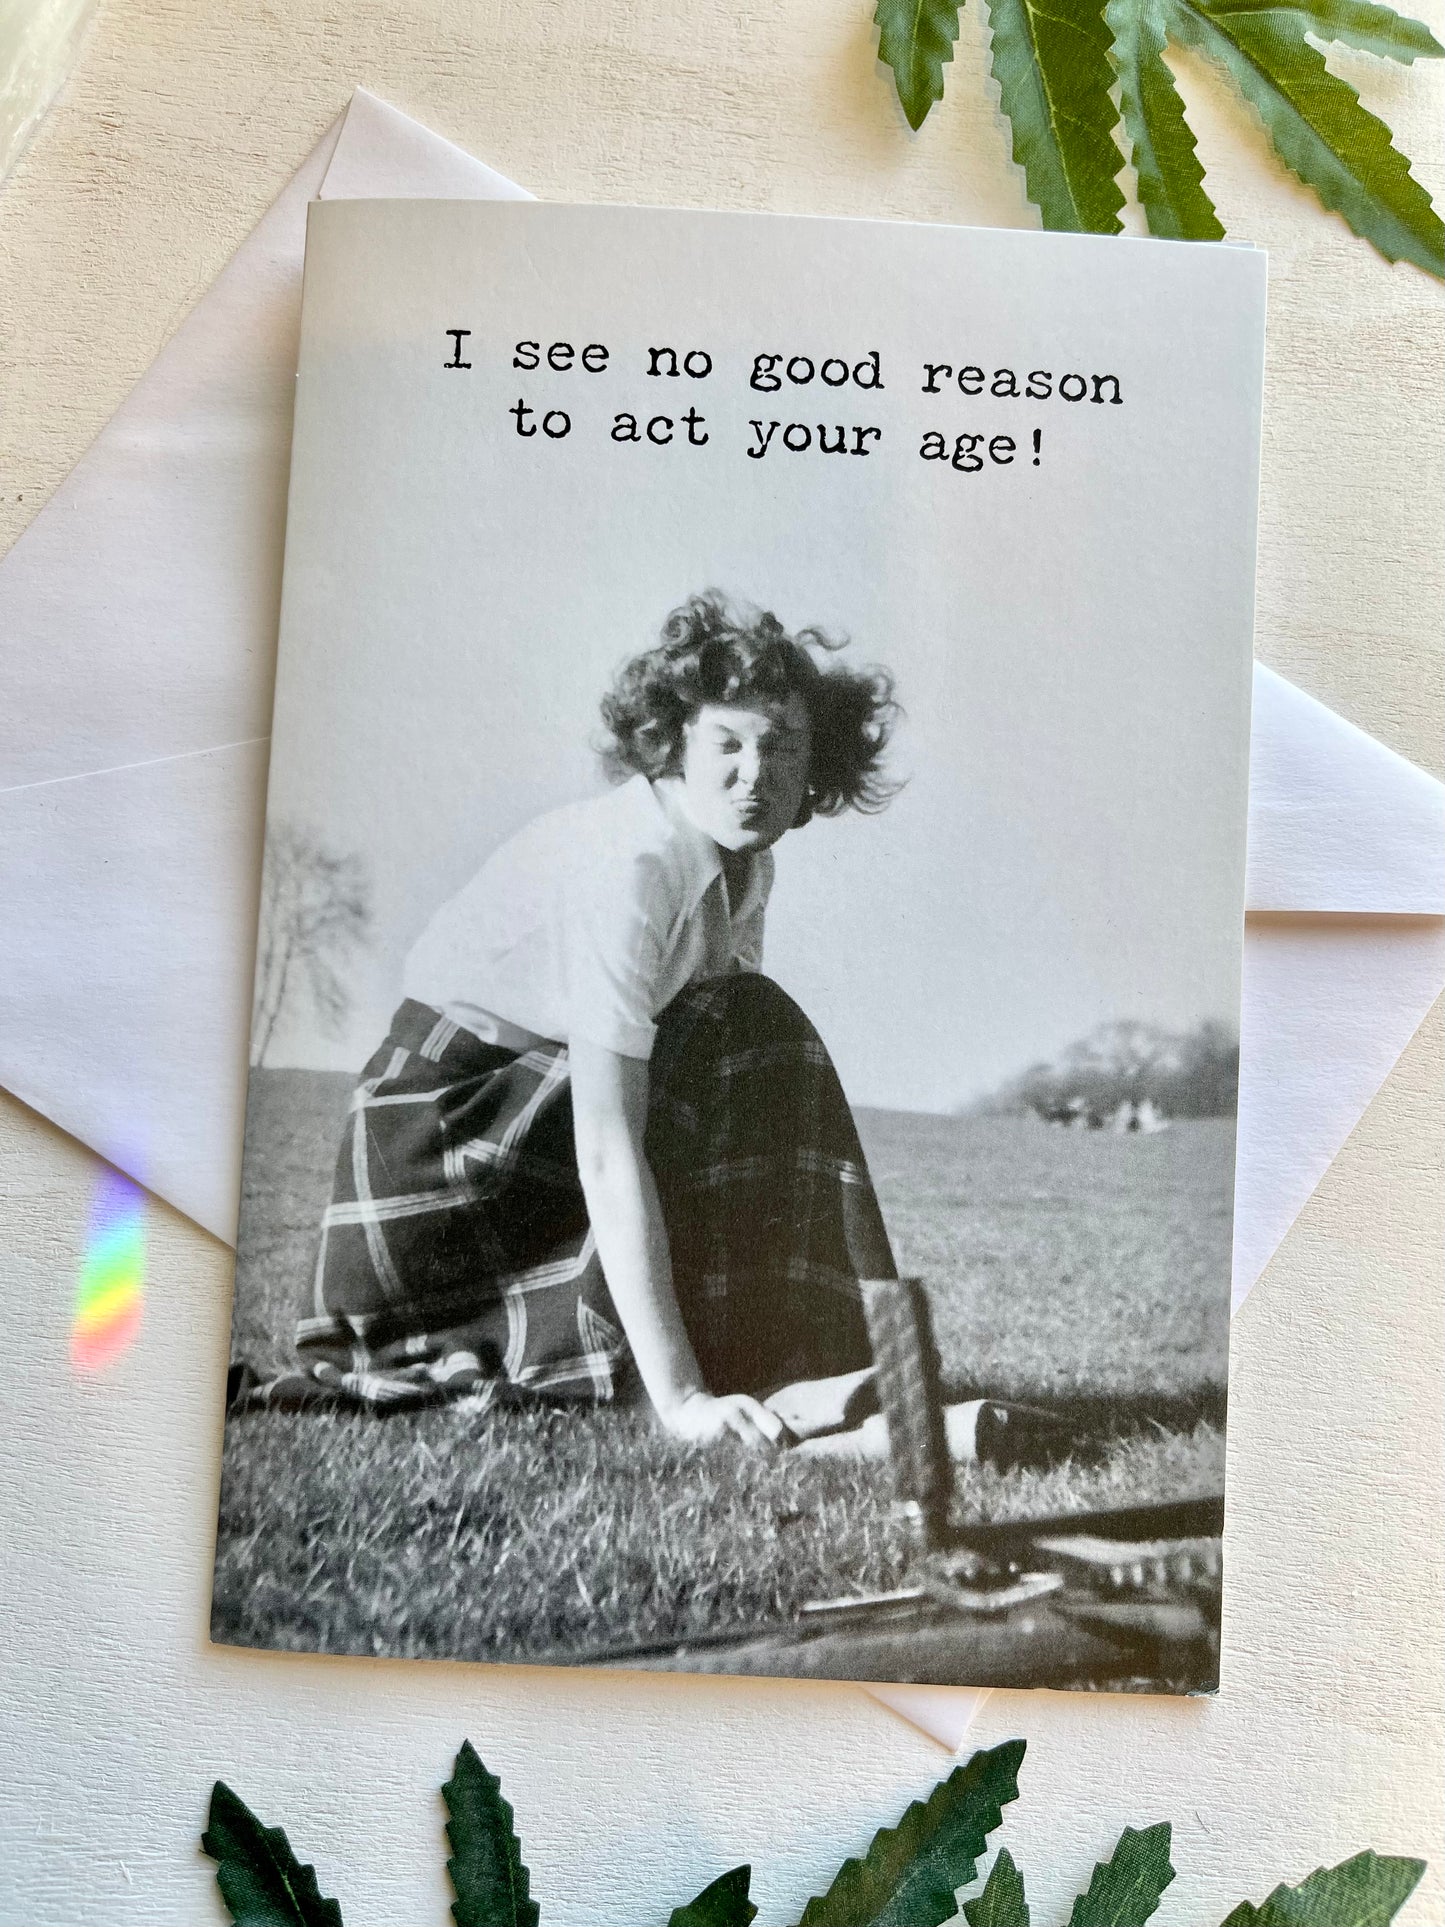 I see no good reason to act your age!